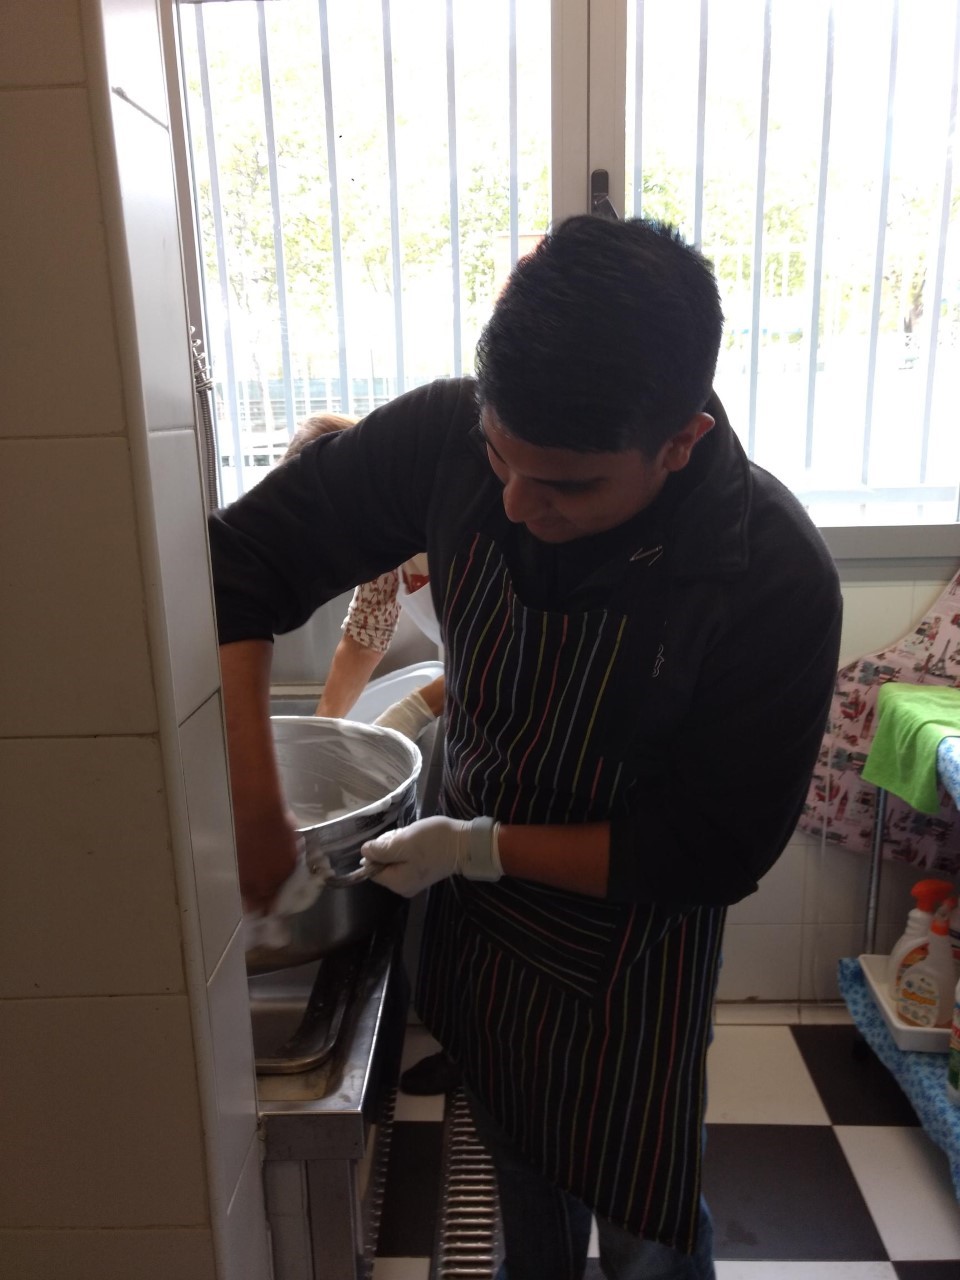 Ramon Juarez washes dishes in a soup kitchen in Madrid